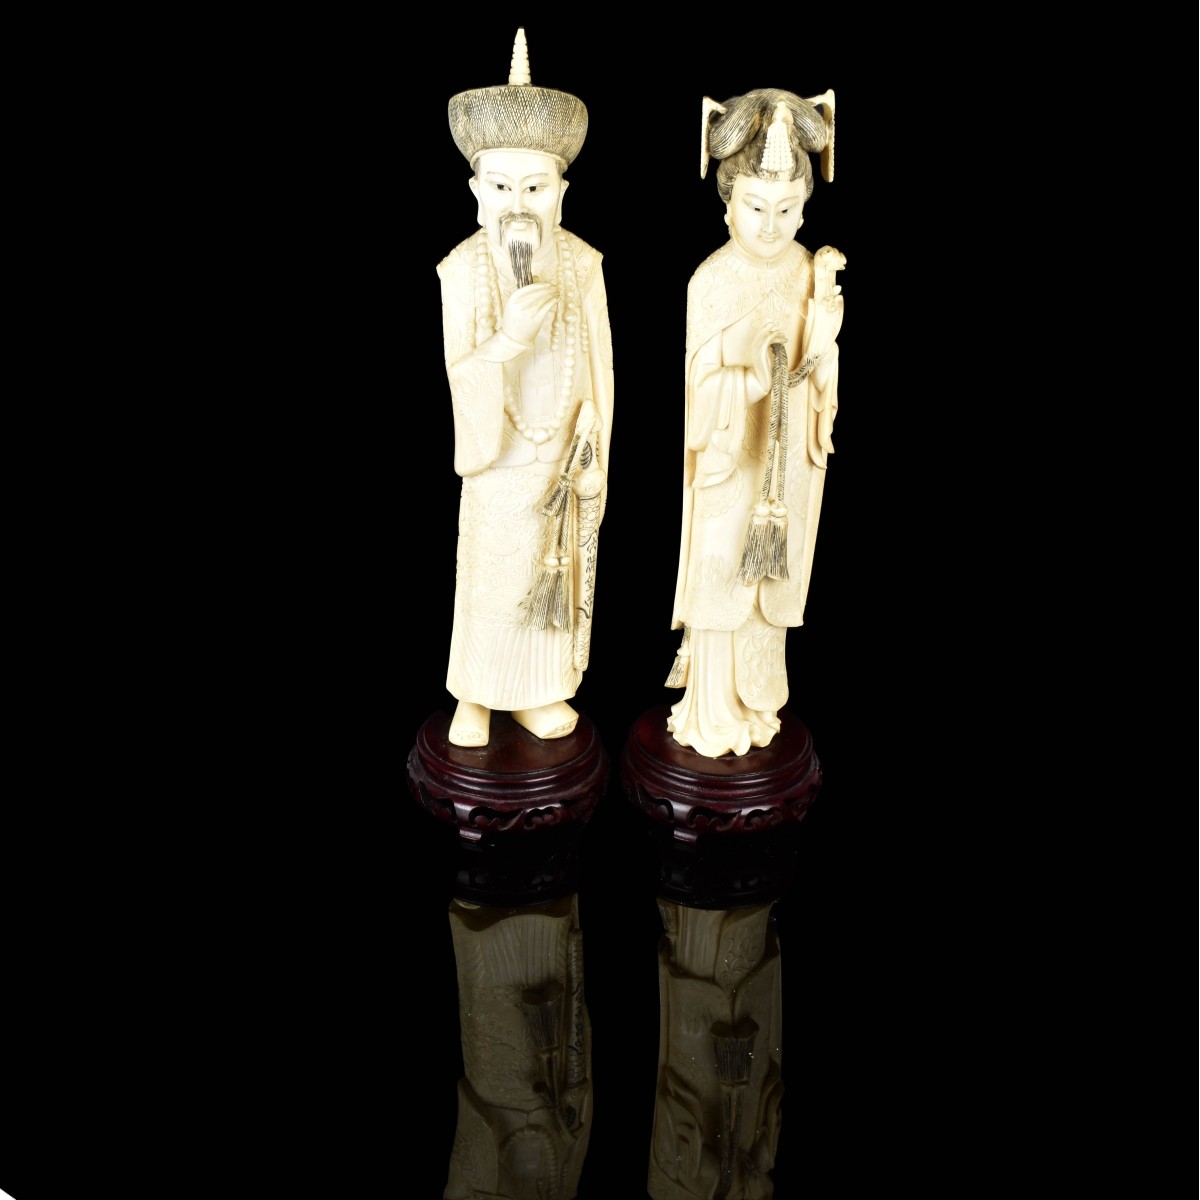 Pair of Chinese Carved Figurines